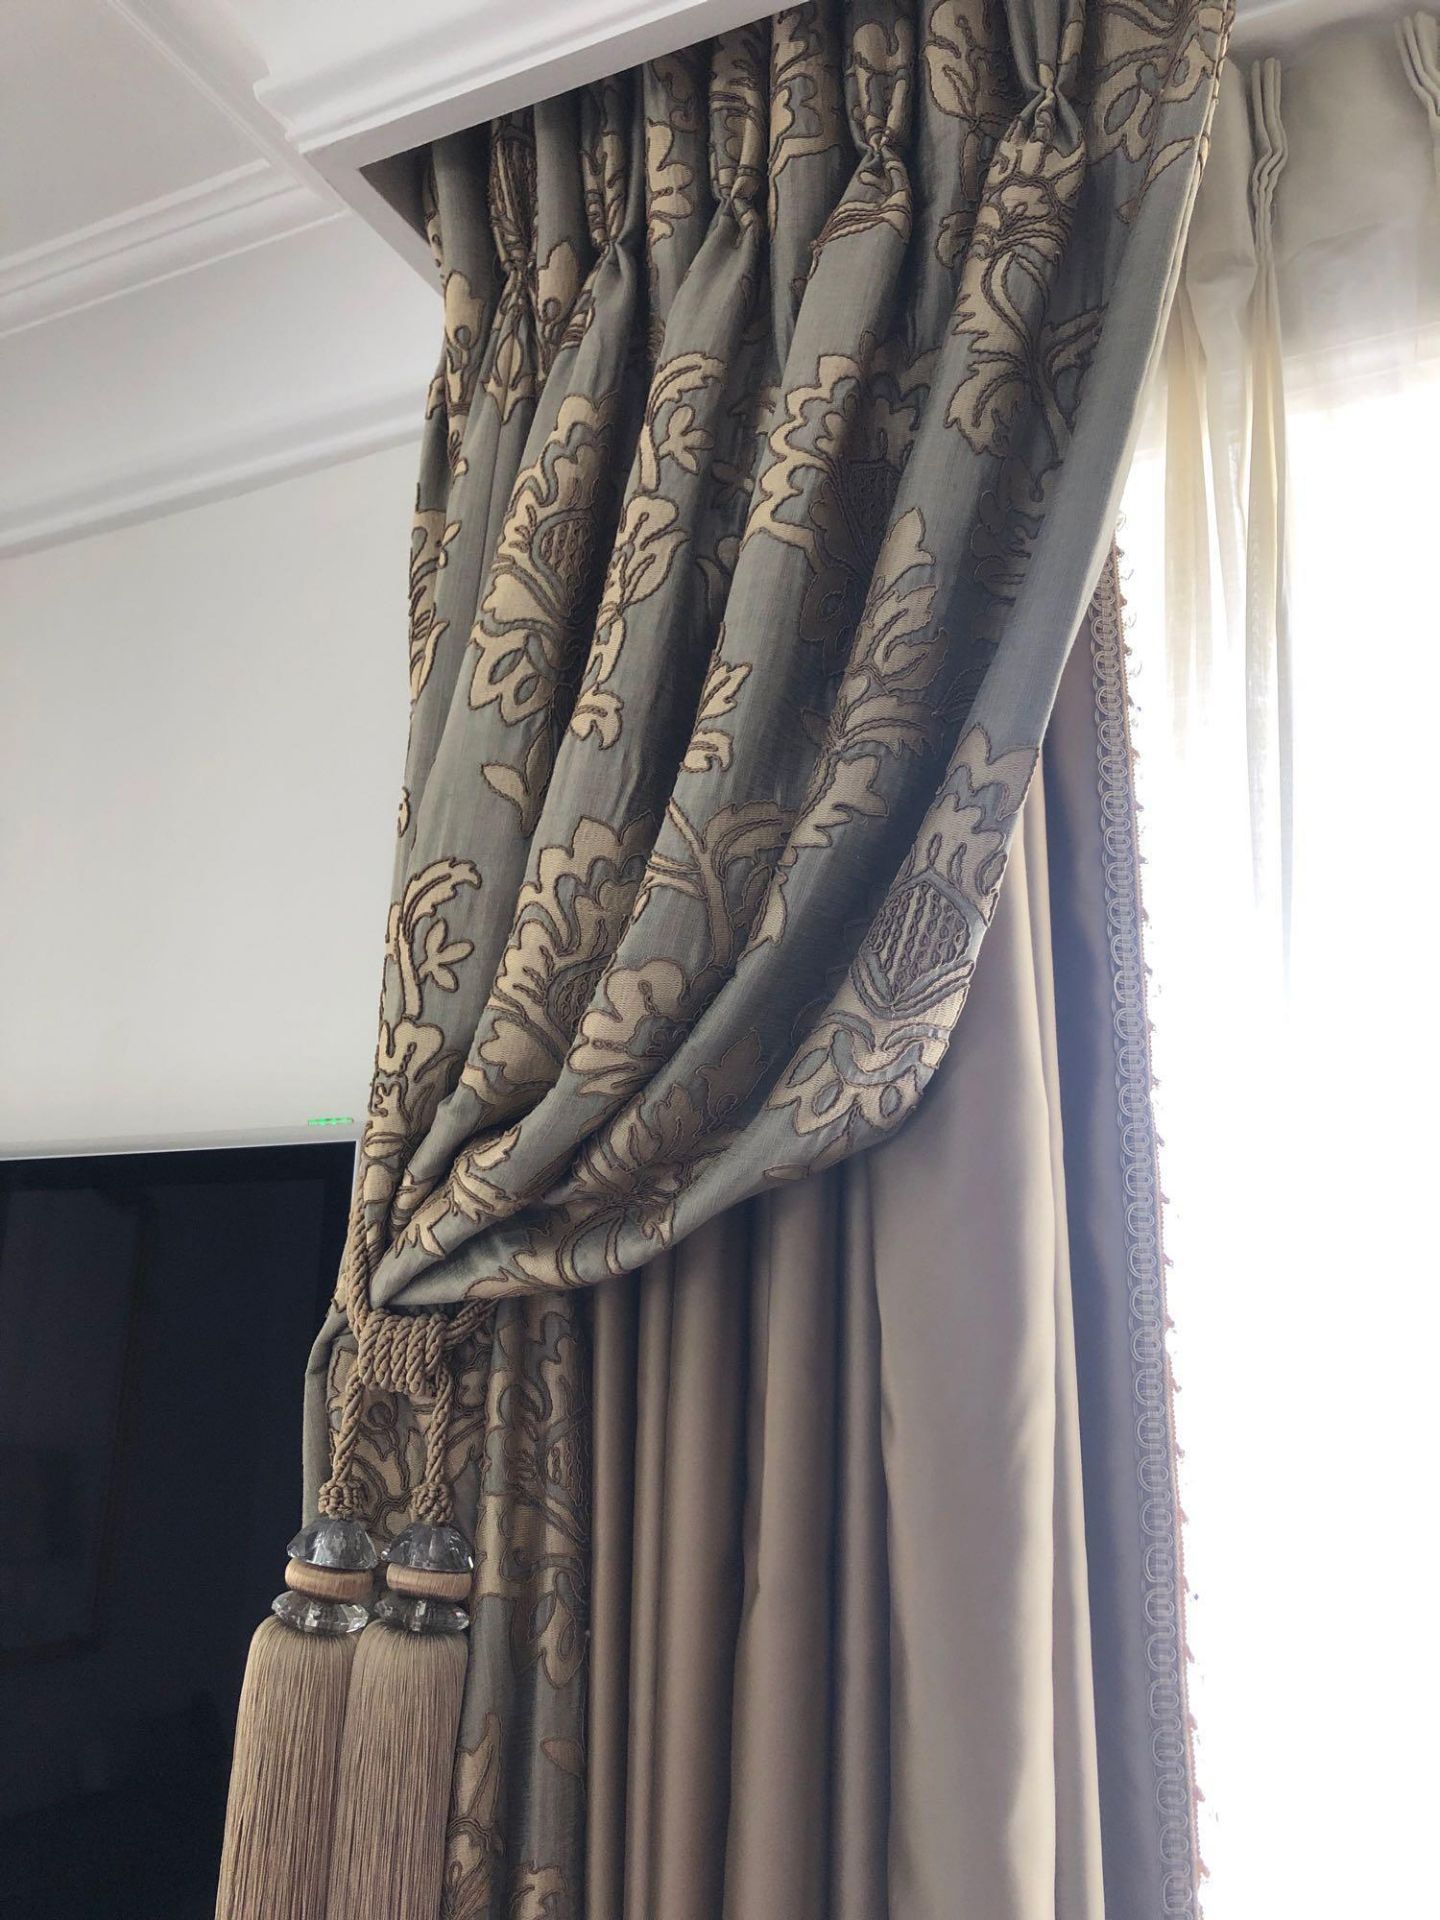 A Pair Of Silk Drapes And Jabots Bronze With Crystal Trim With Brown And Floral Design With Tassel - Image 2 of 2